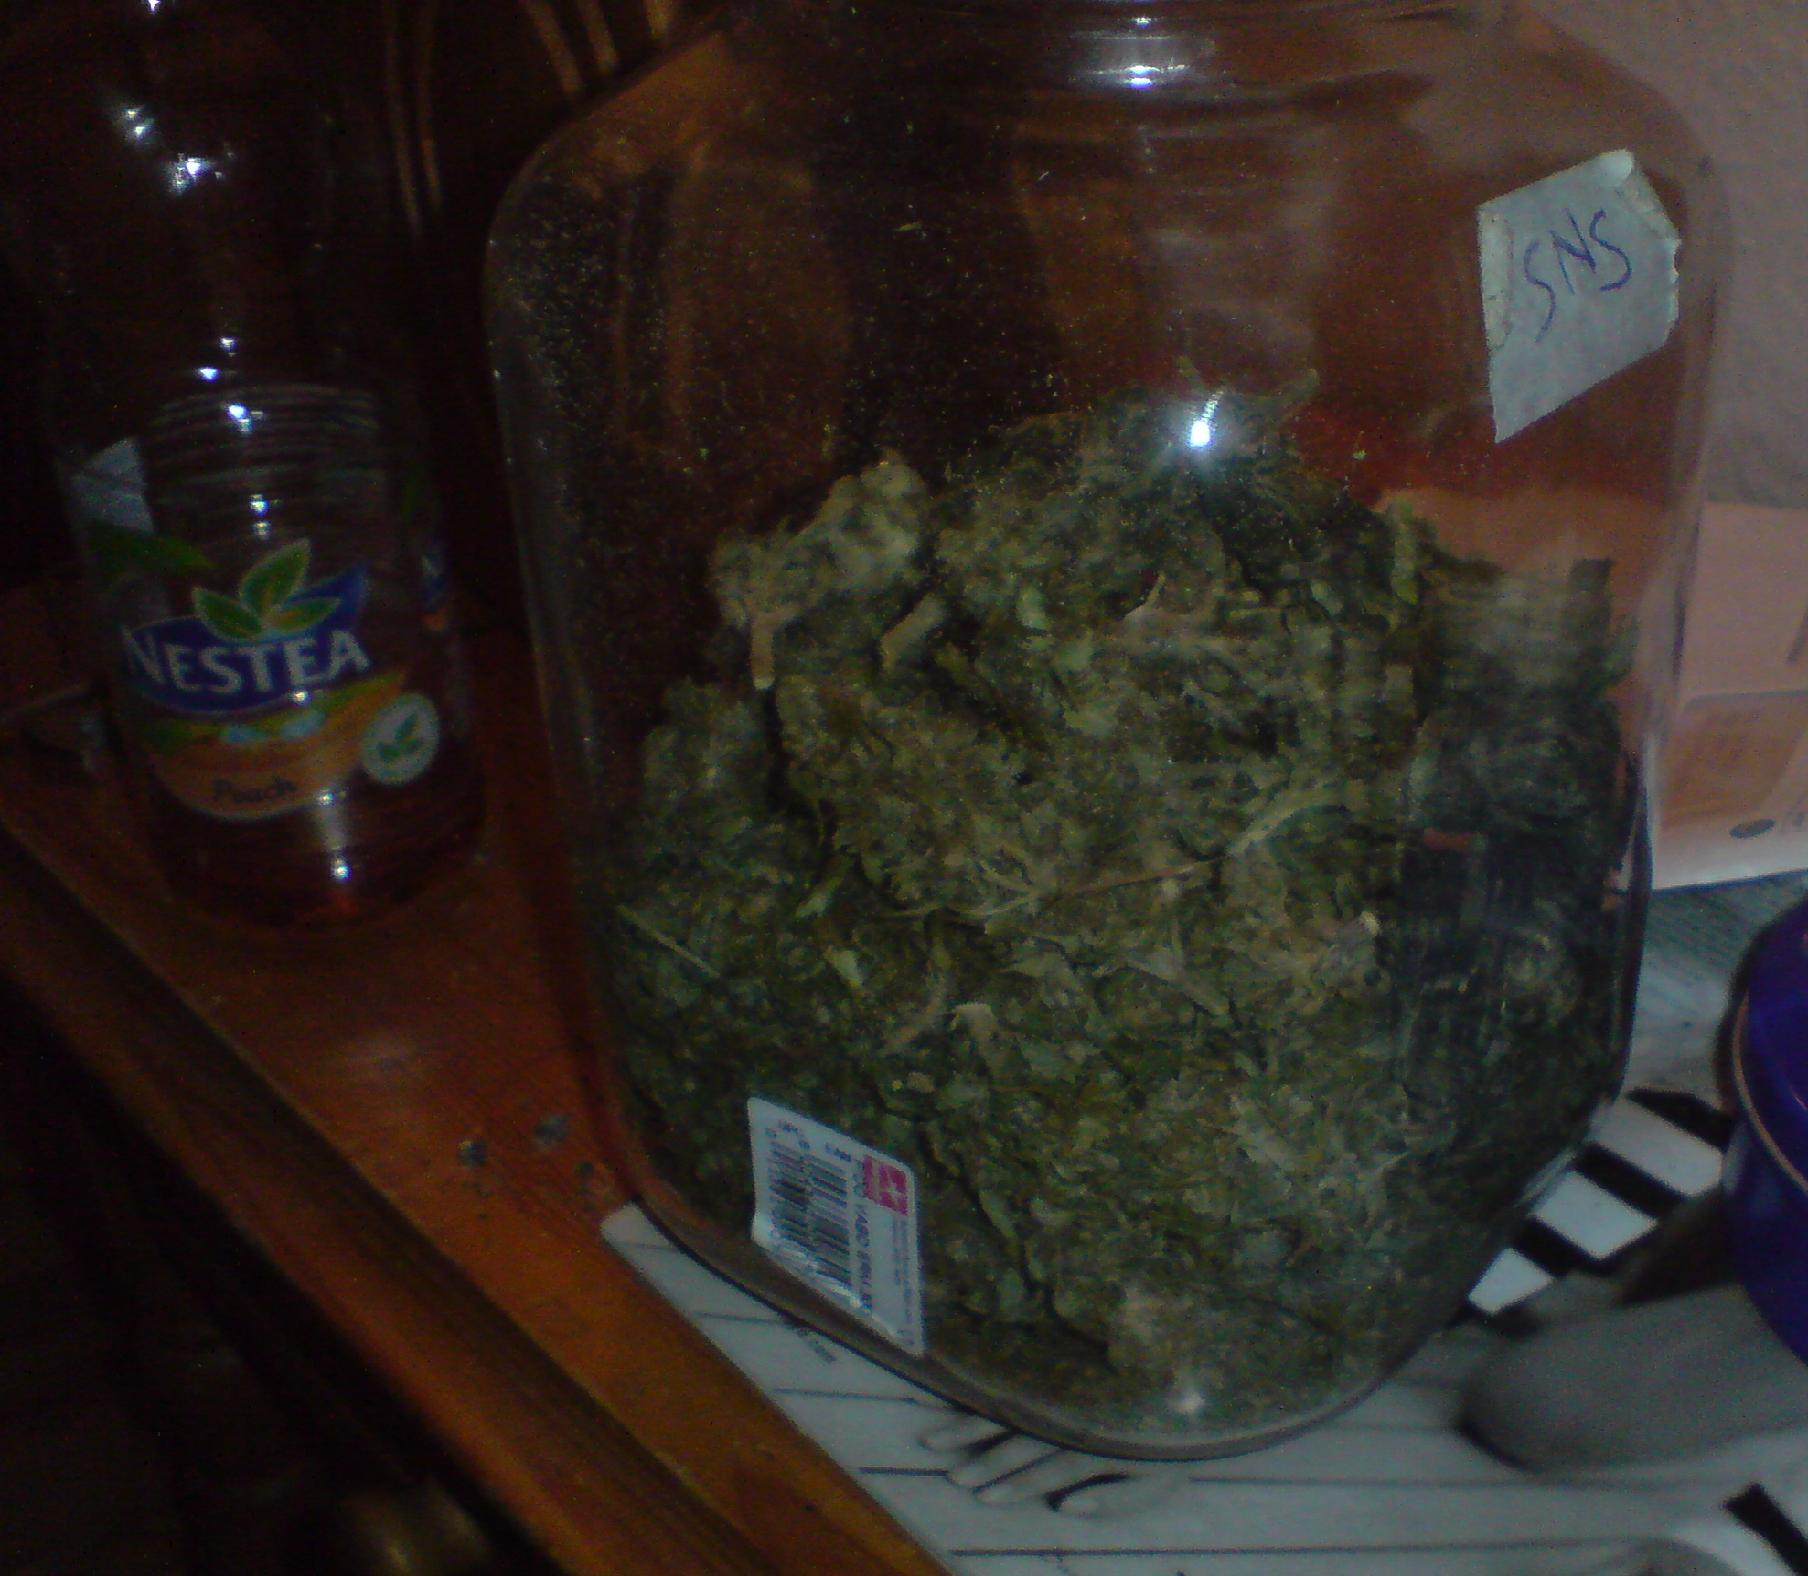 A friend of mine's Jar of buds. It contains like 100 grams of some good shit from amsterdam